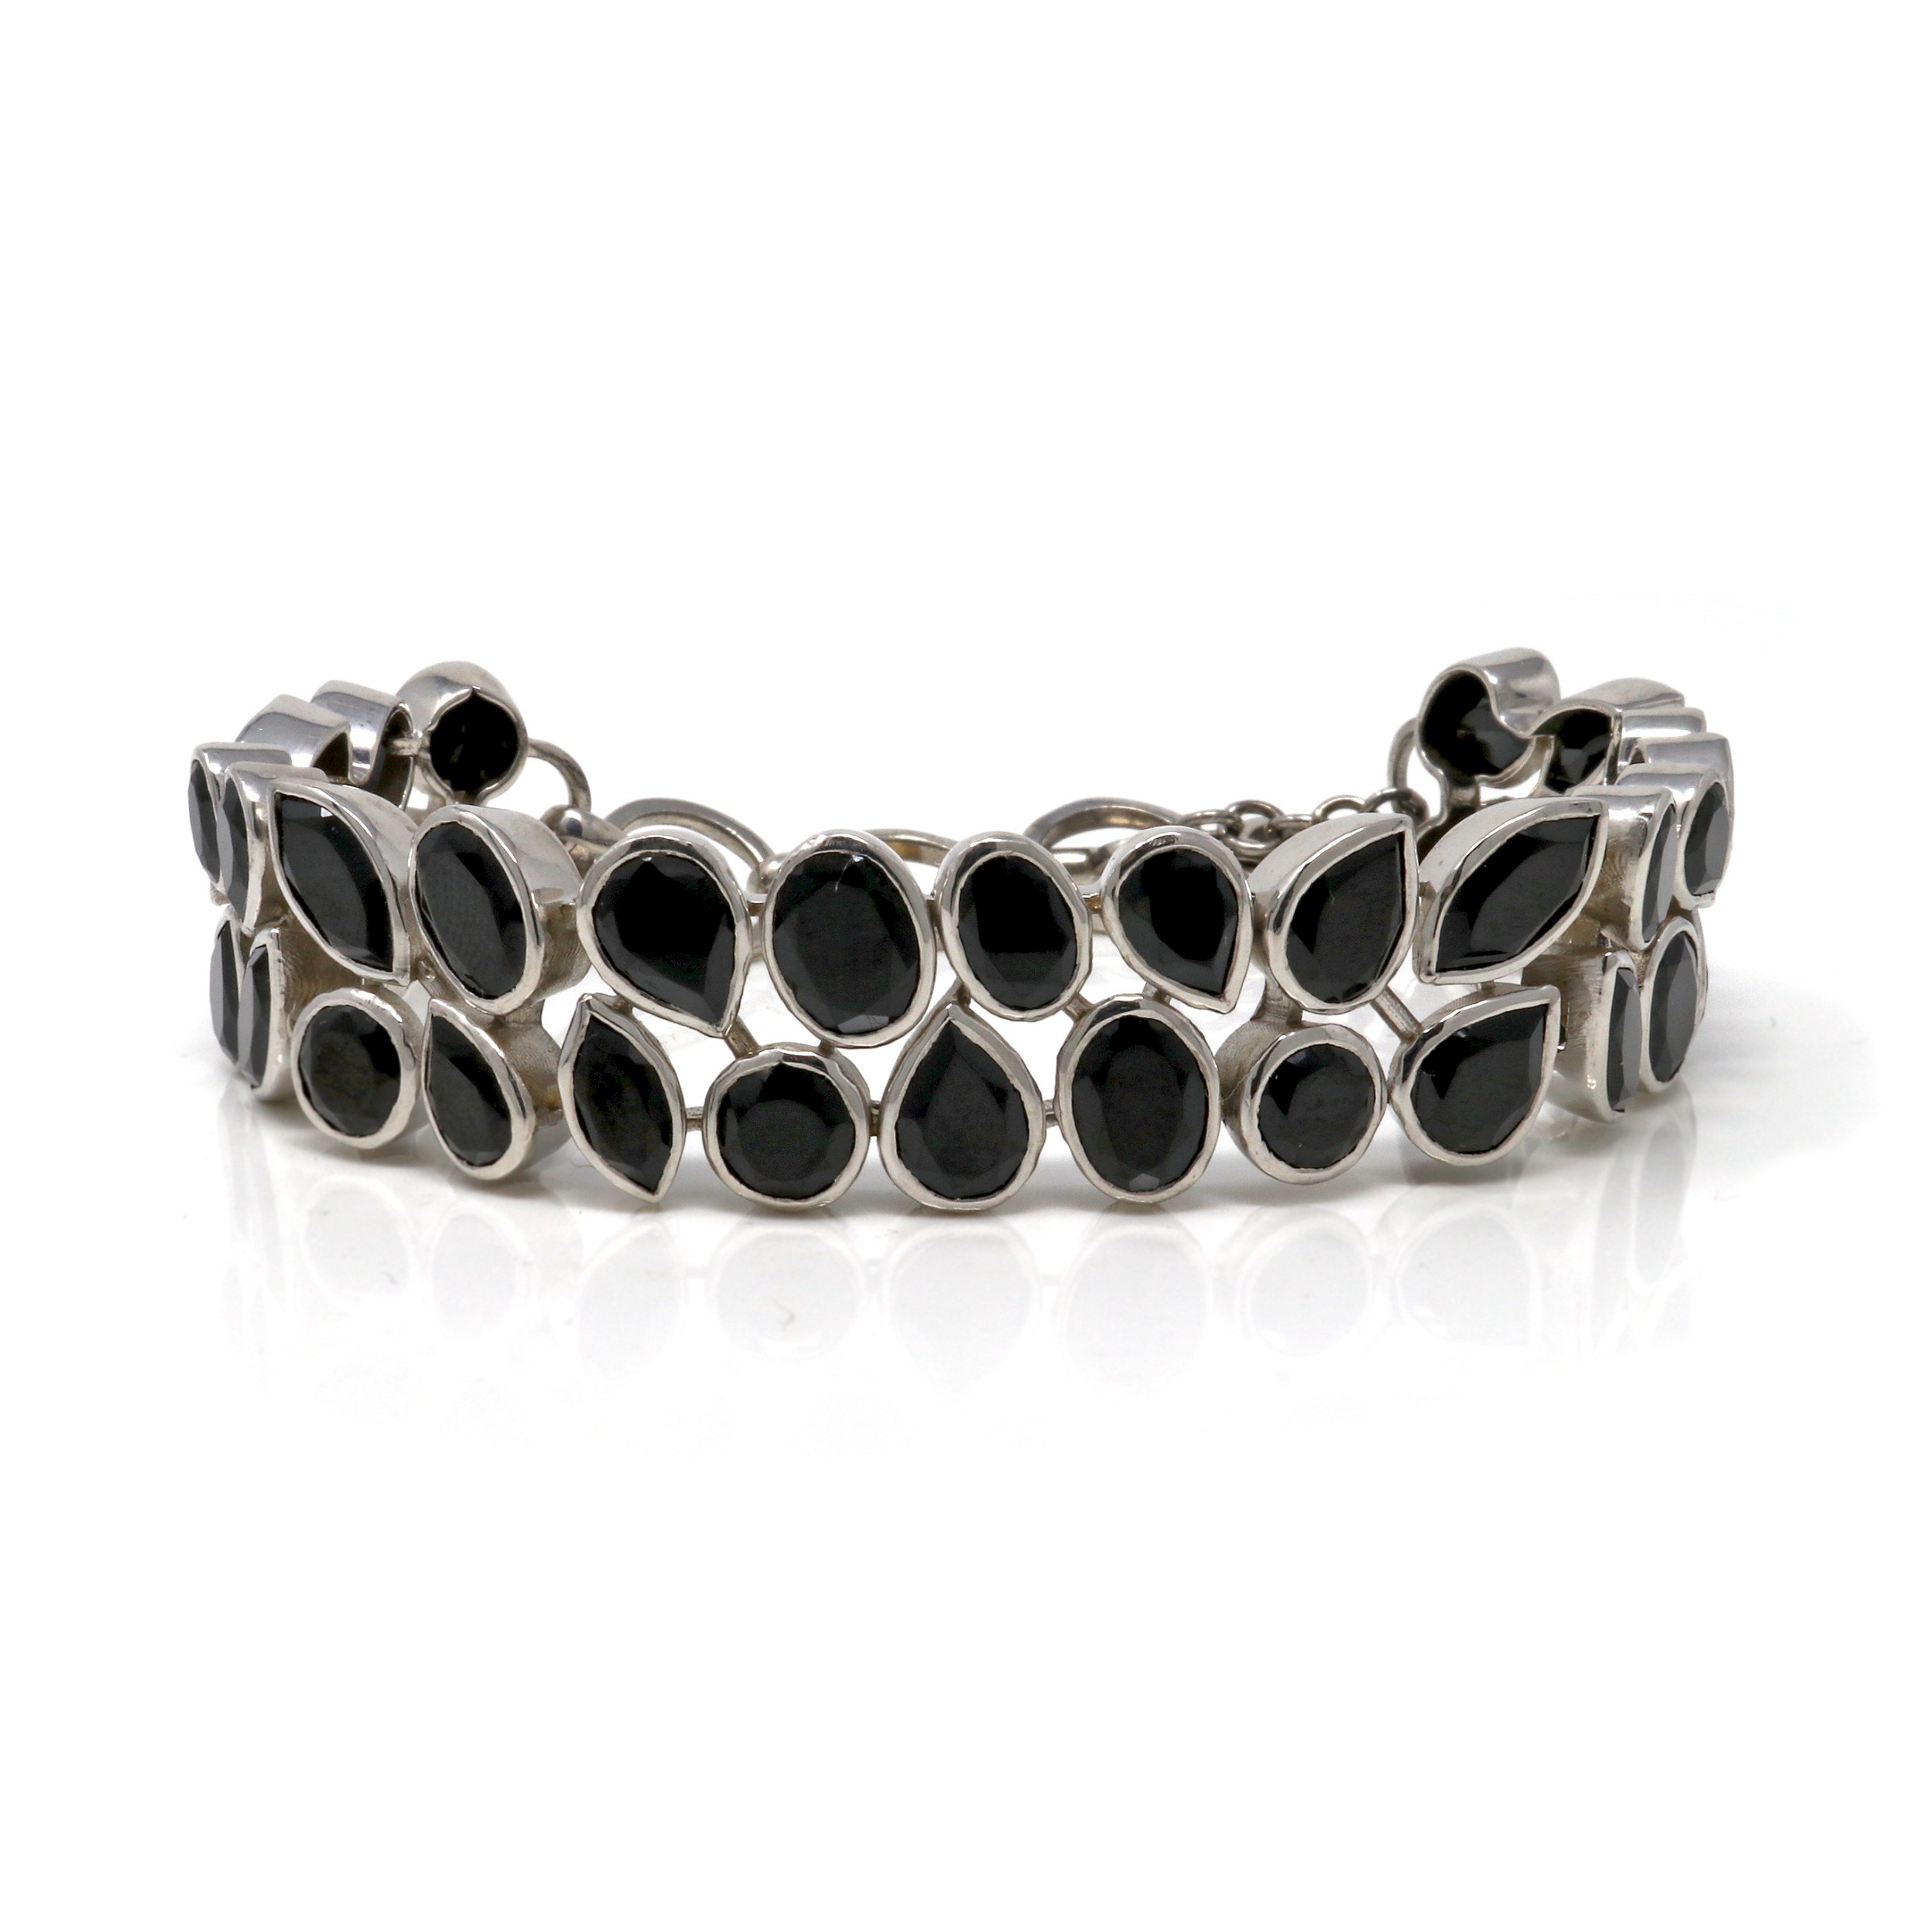 Black Spinel Bracelet -Faceted With Hollow Under Carriage